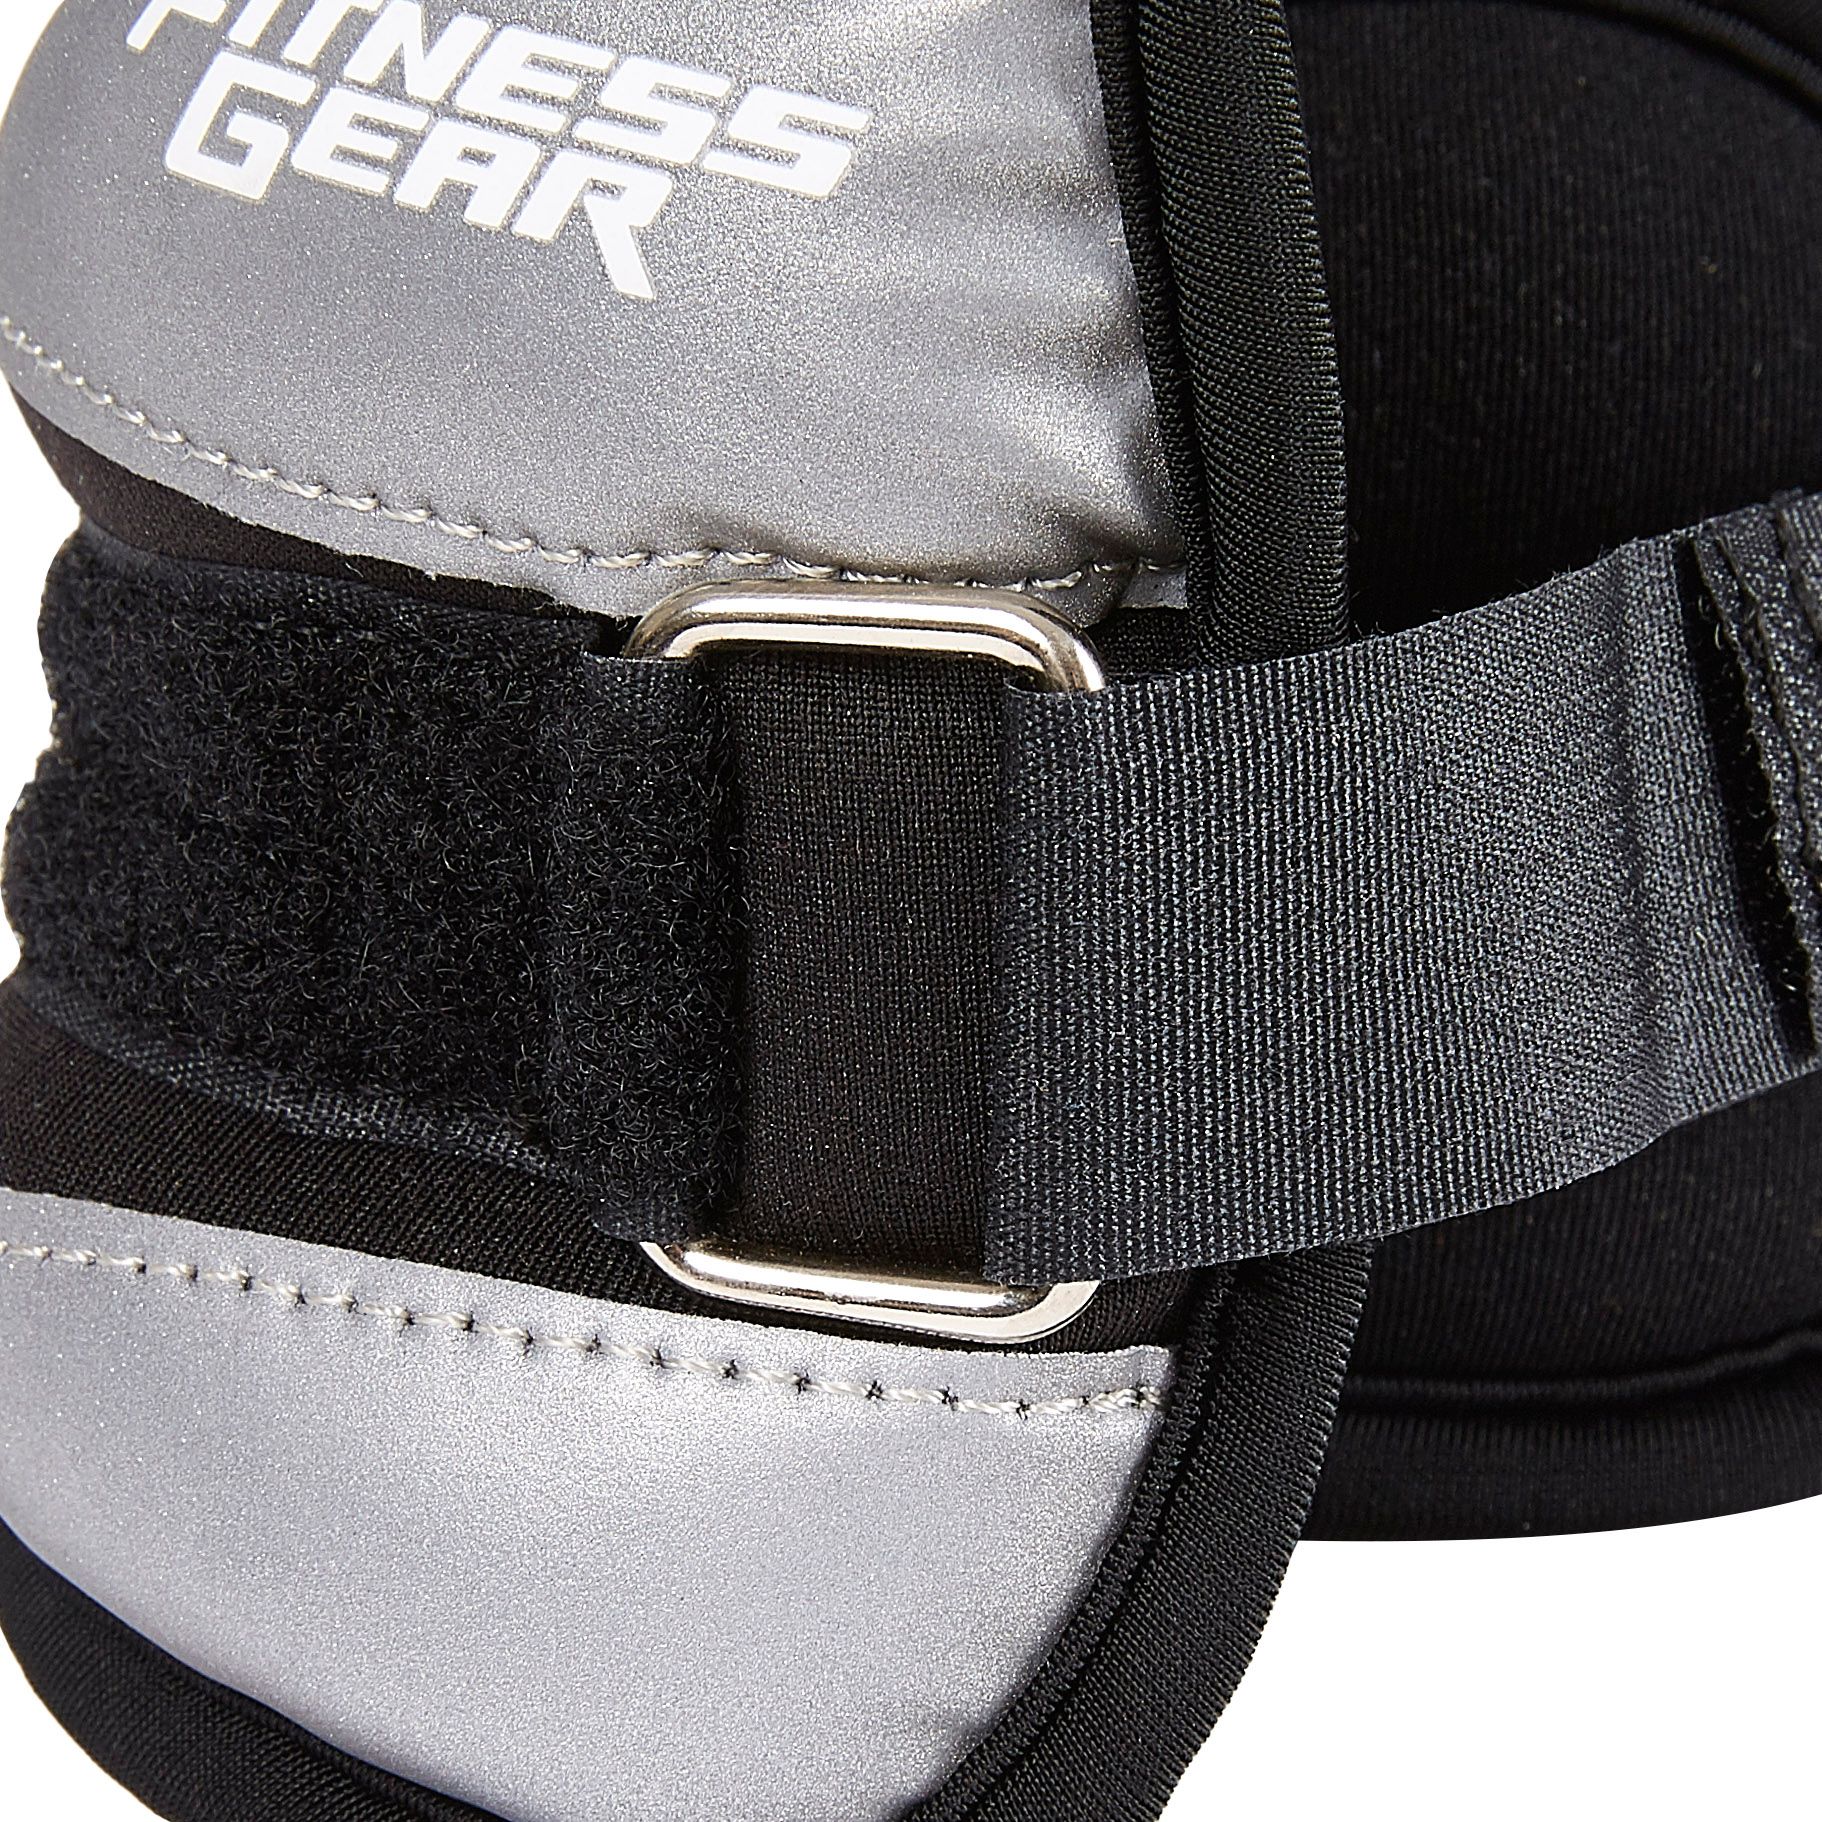 Fitness Gear Adjustable Ankle Weights